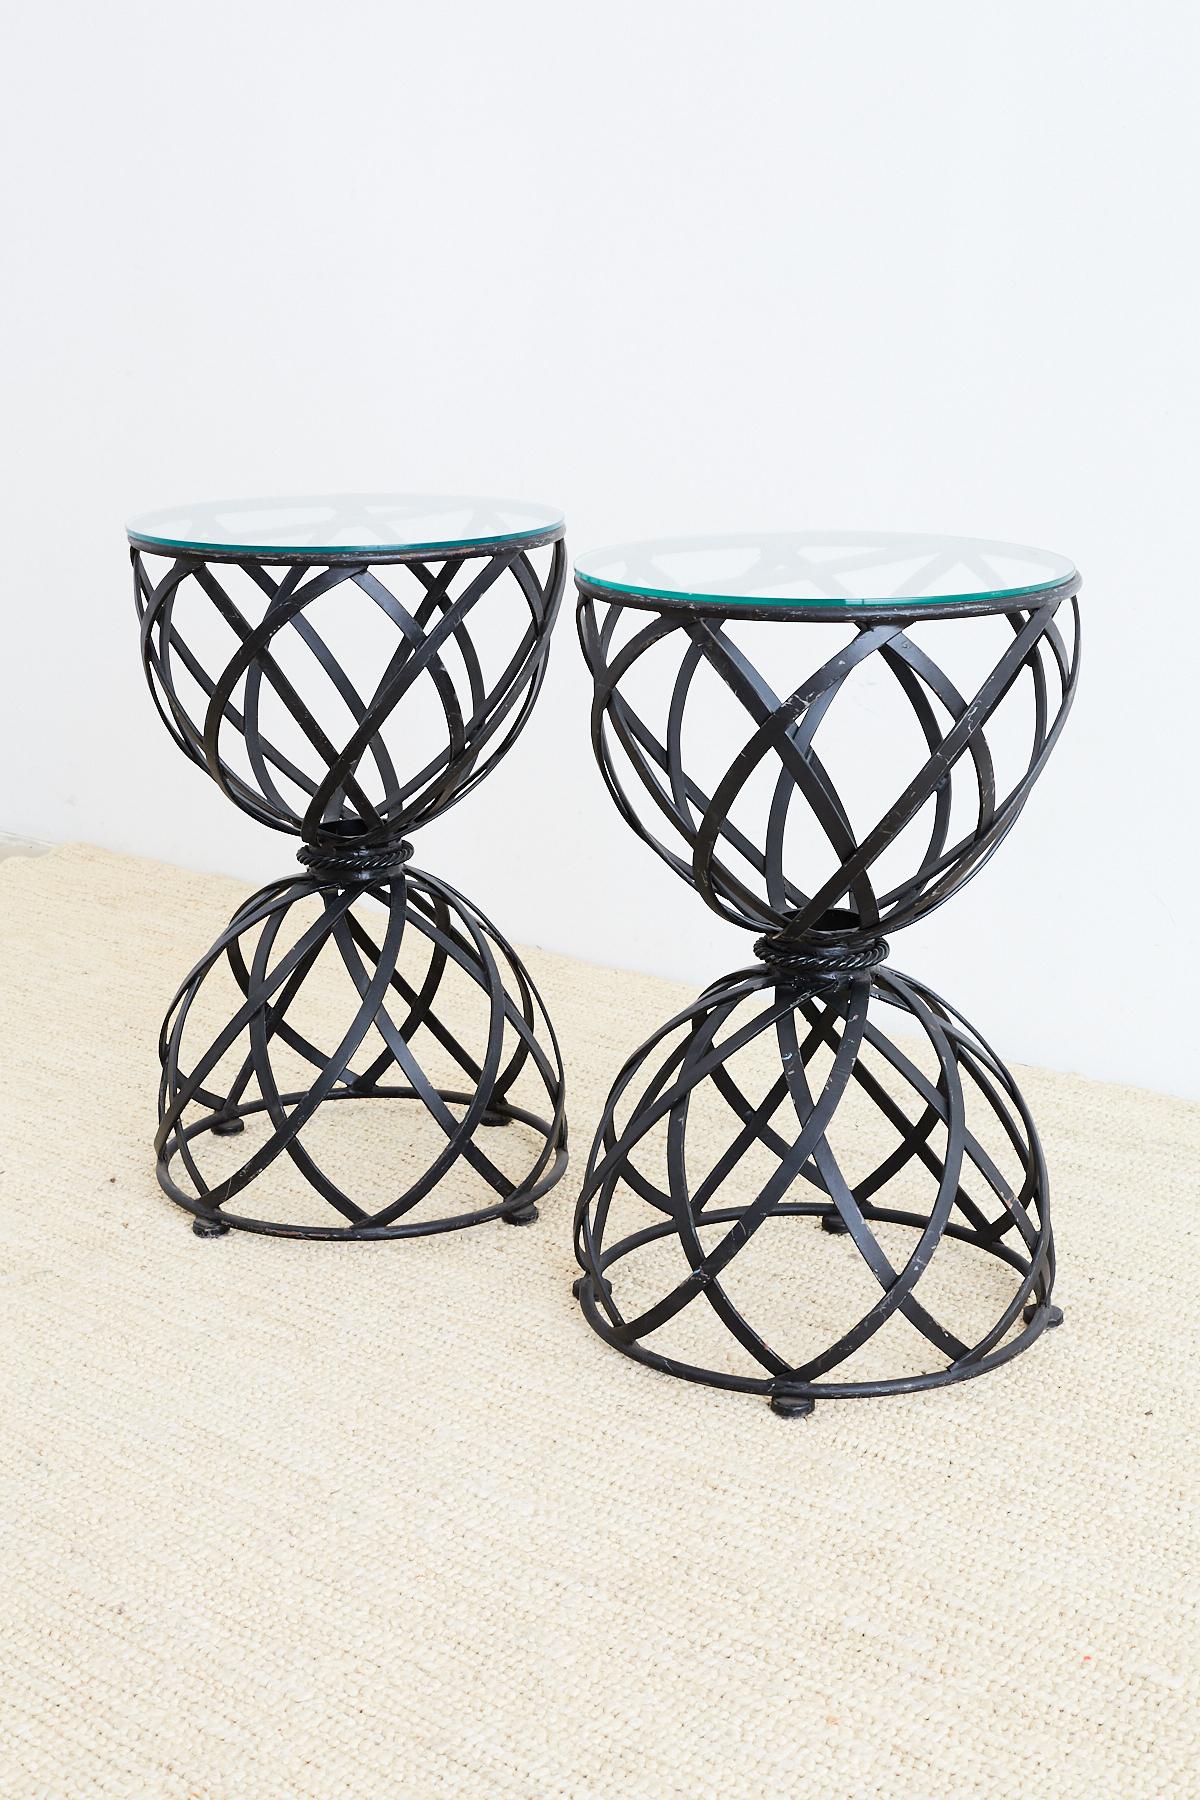 Pair of Woven Iron Basket Design Drinks Tables 5